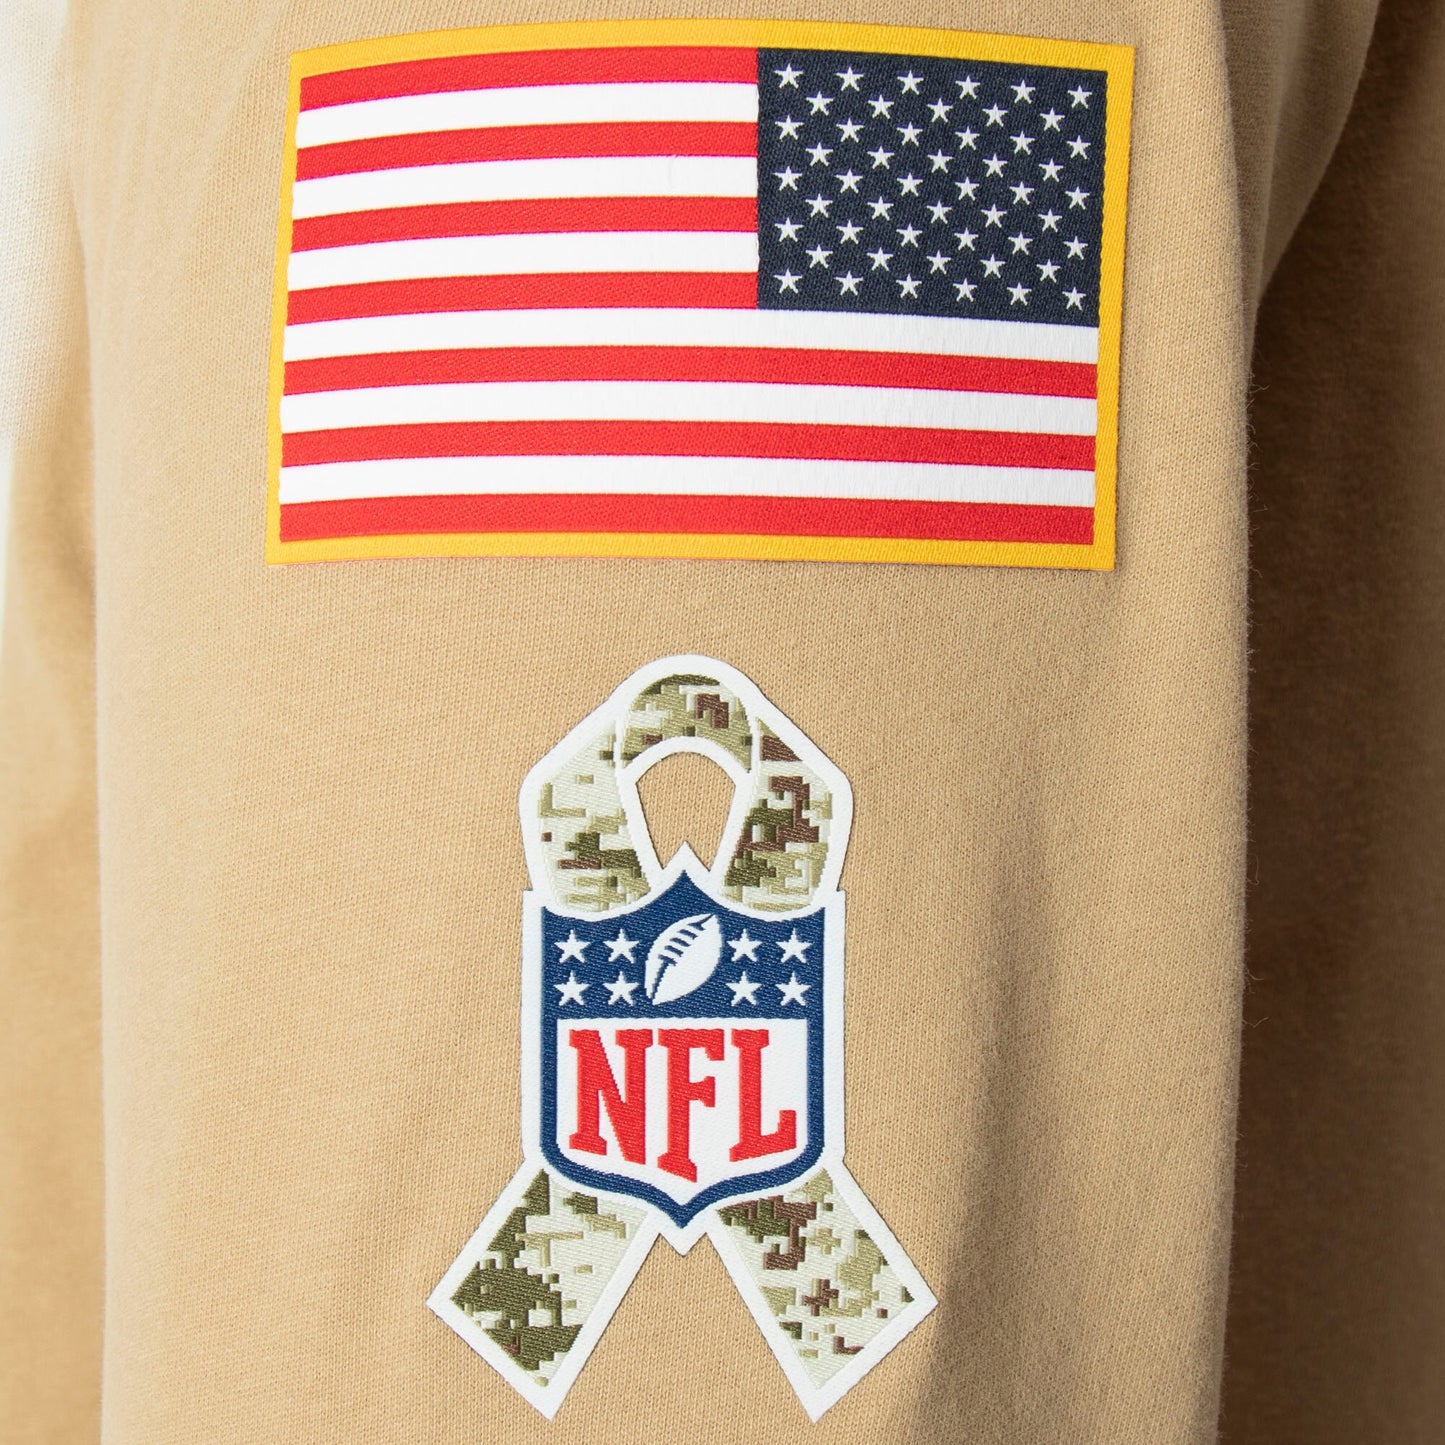 Men's Nike Chicago Bears Tan 2019 Salute to Service Sideline Therma Pullover Hoodie